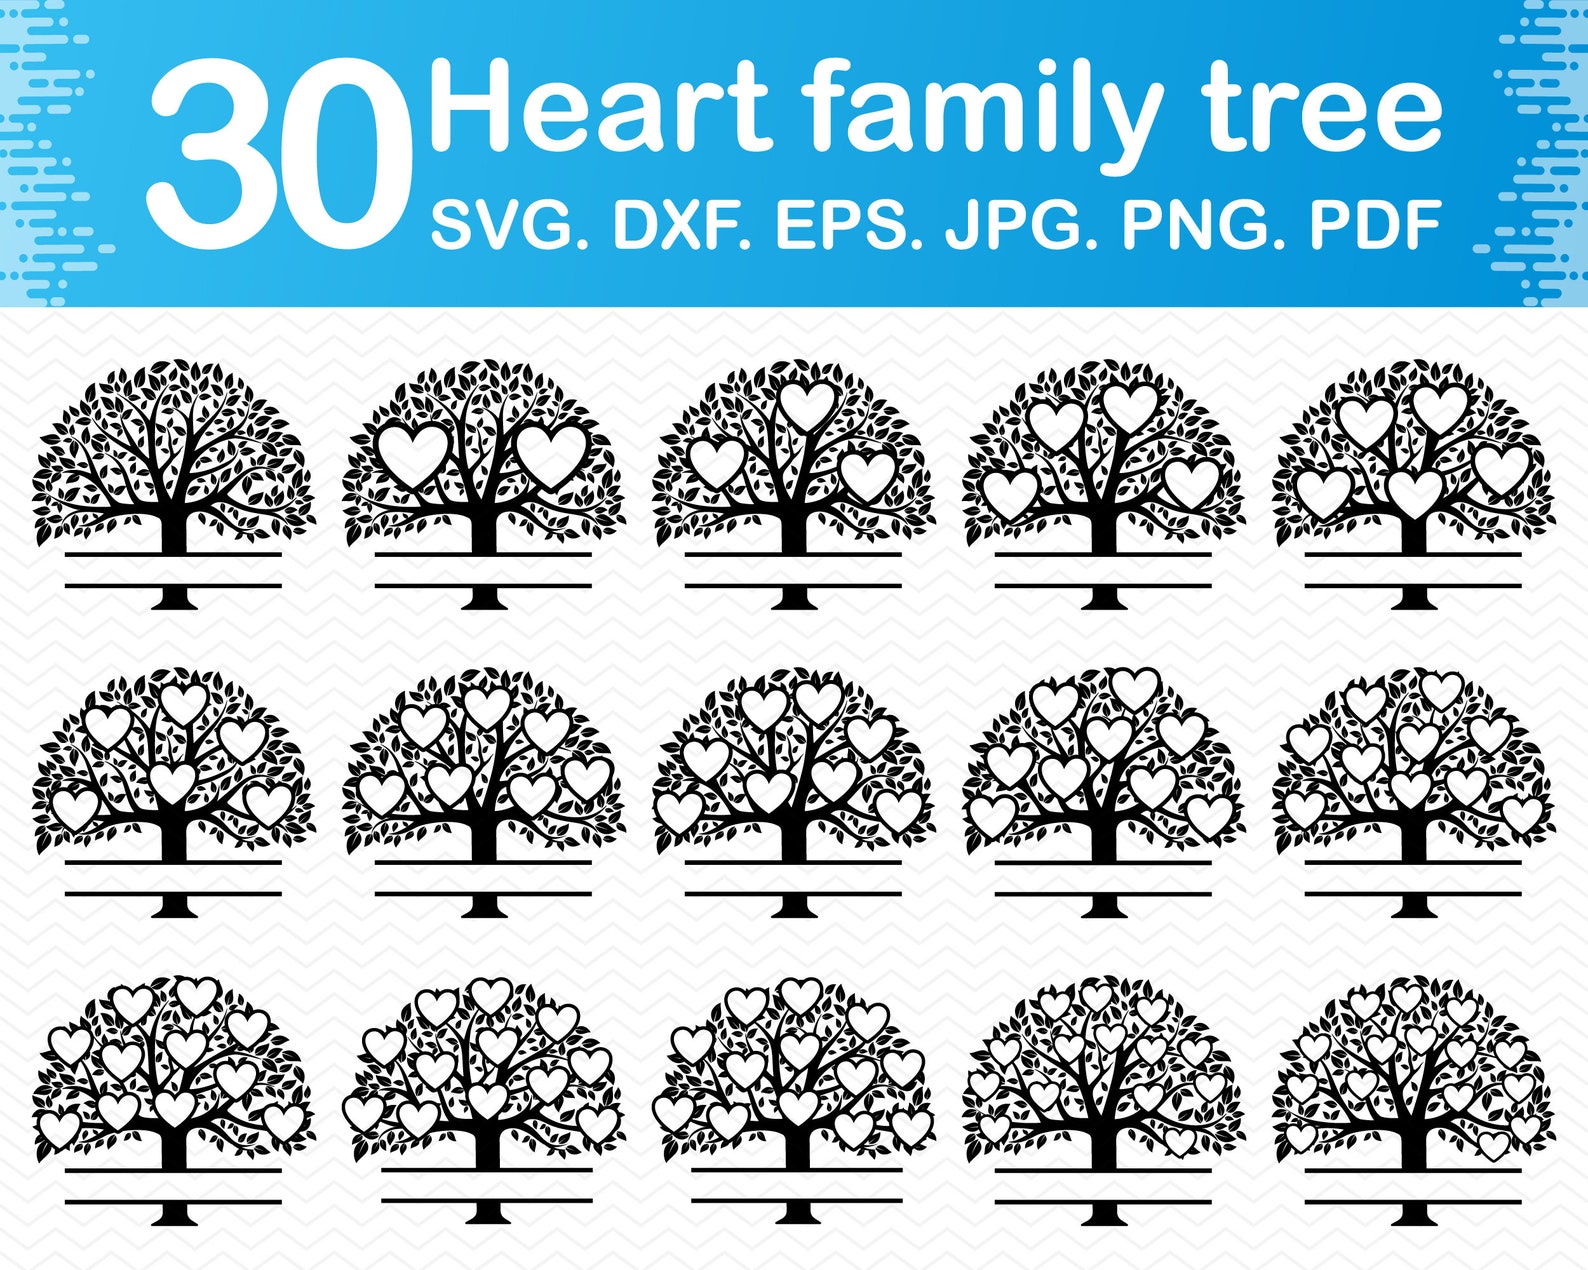 This is a great example of Heart Family Tree for your design.